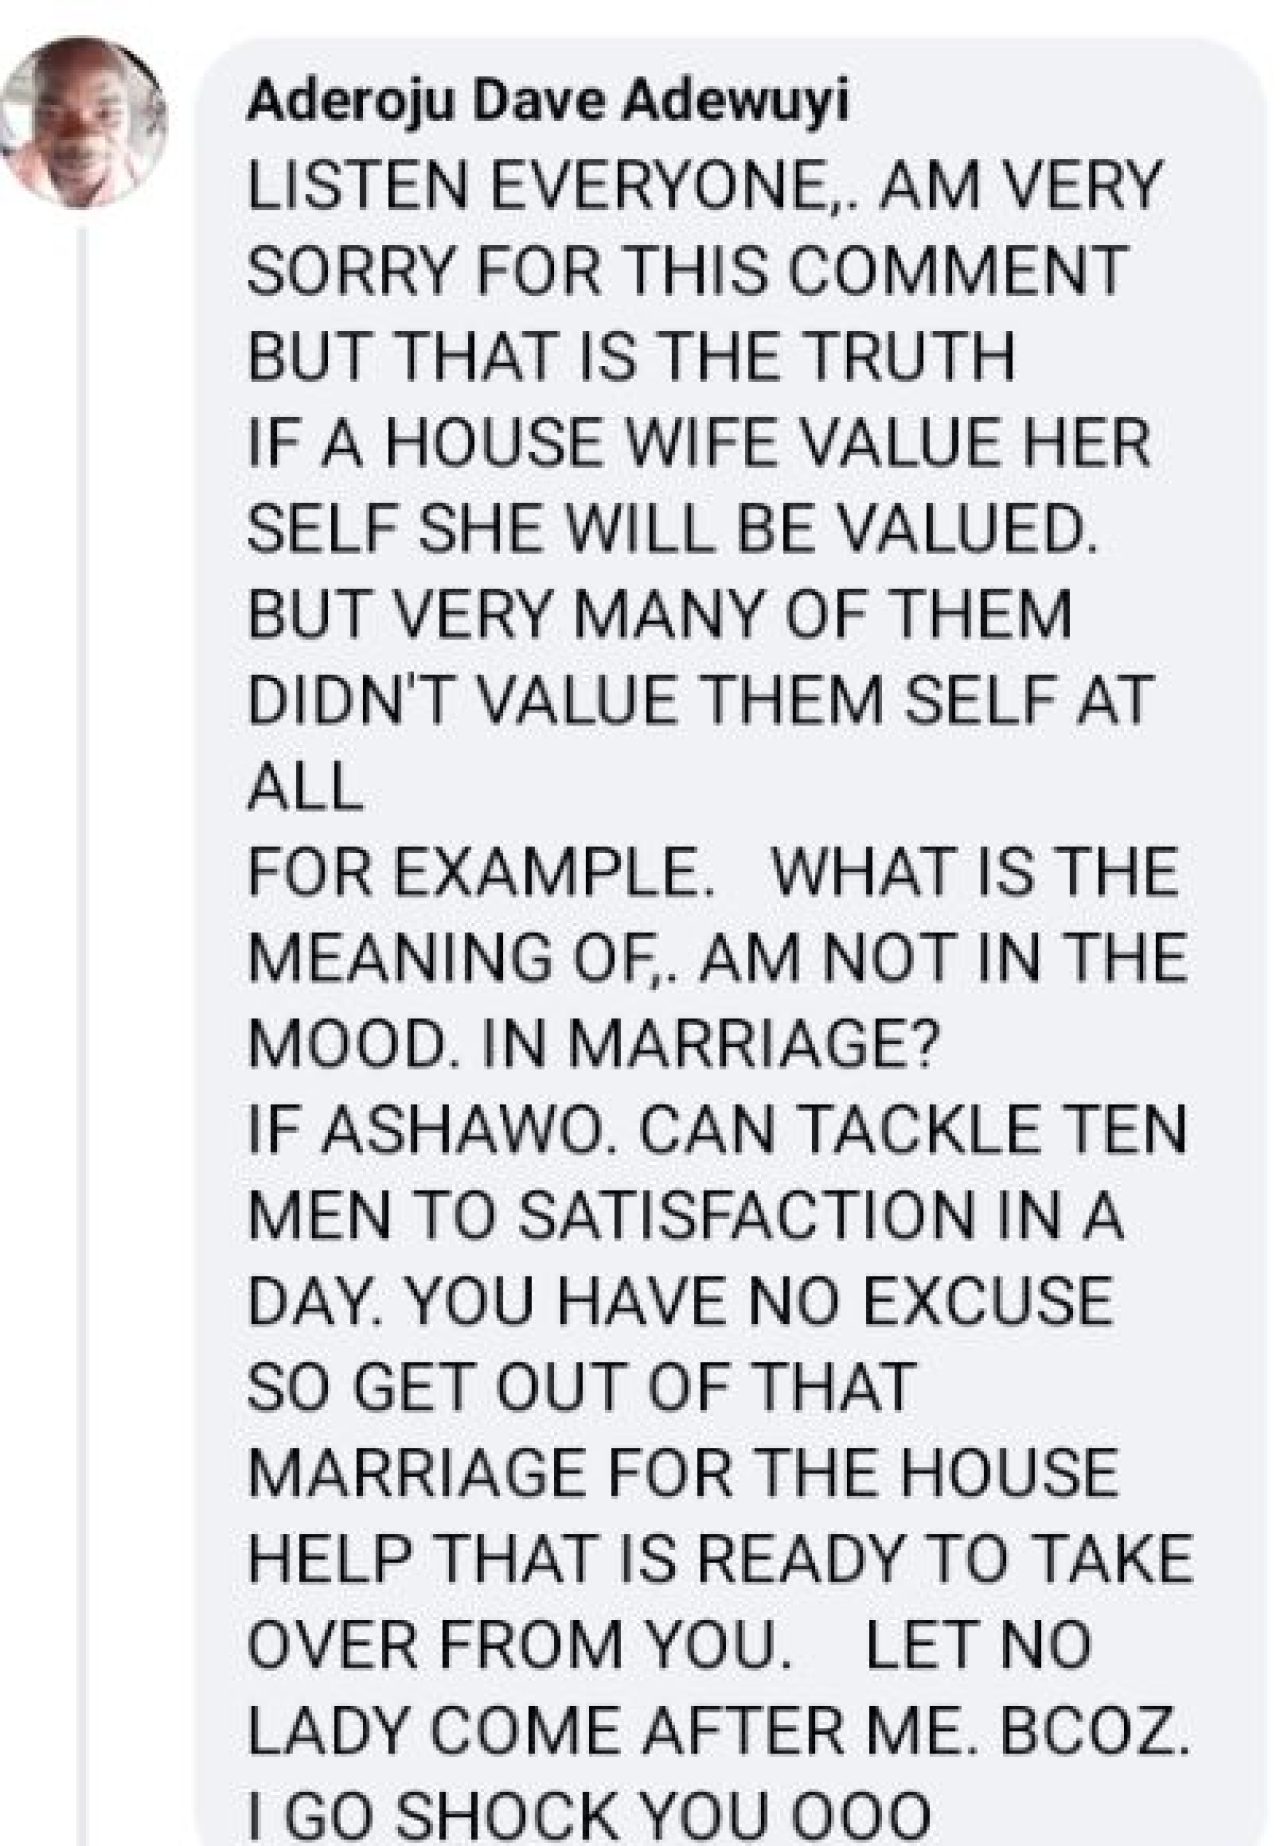 If 'Ashawo' can tackle 10 men daily, you have no excuse - Nigerian man chides married women. Afro News Wire